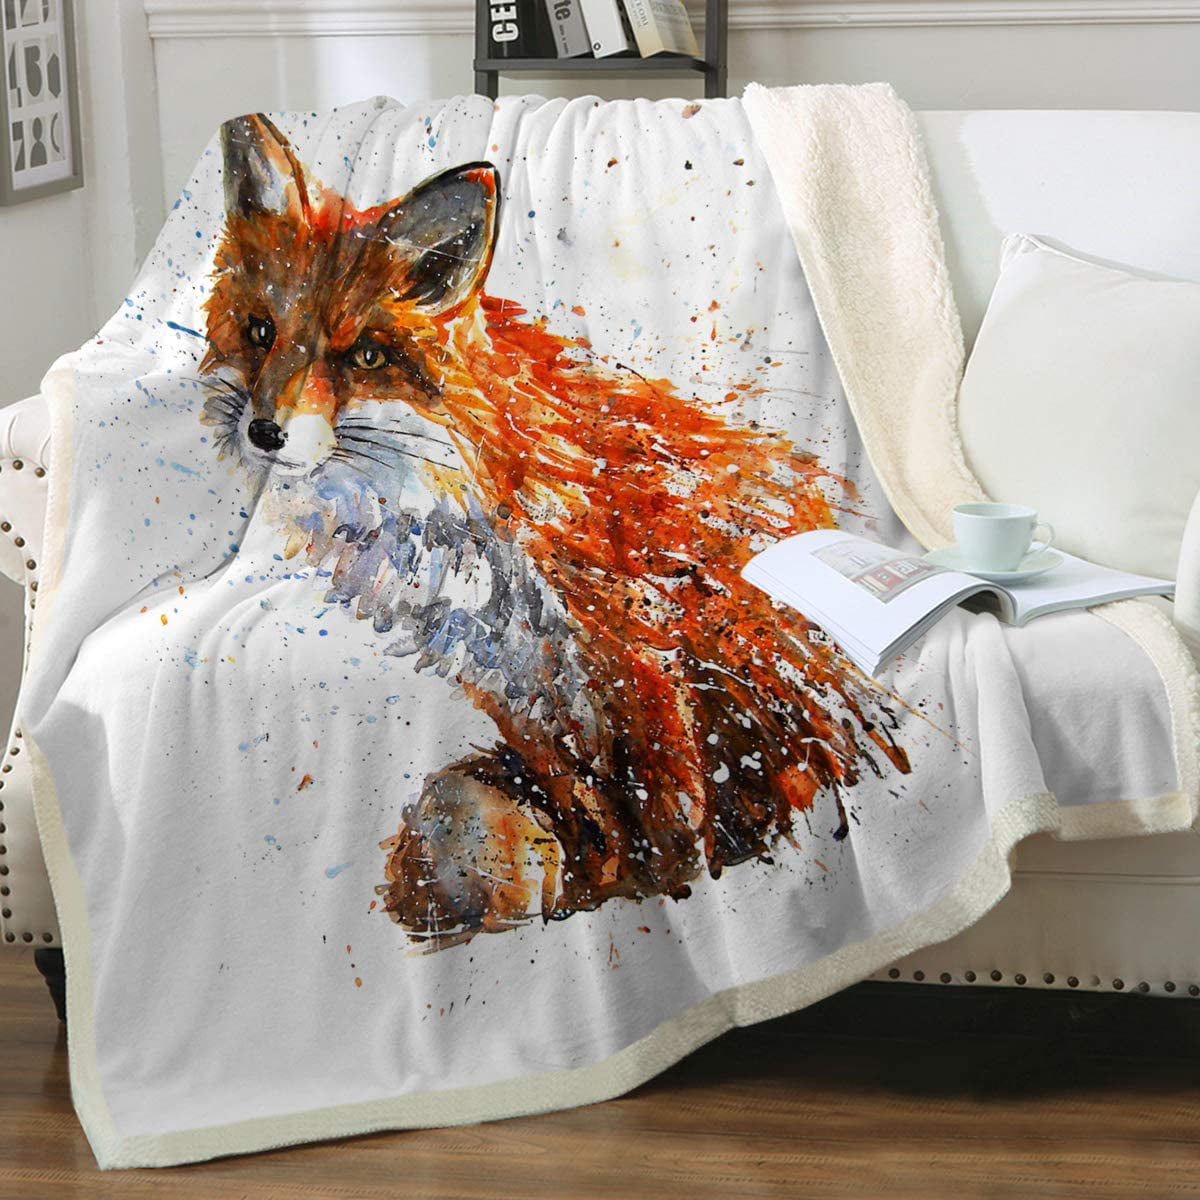 Flannel Fleece Blanket Full Size Cute Foxes in Autumn Leaves Blanket,All-Season Plush Blanket for Couch Bed Travelling Camping Or Kids Adults 60X50